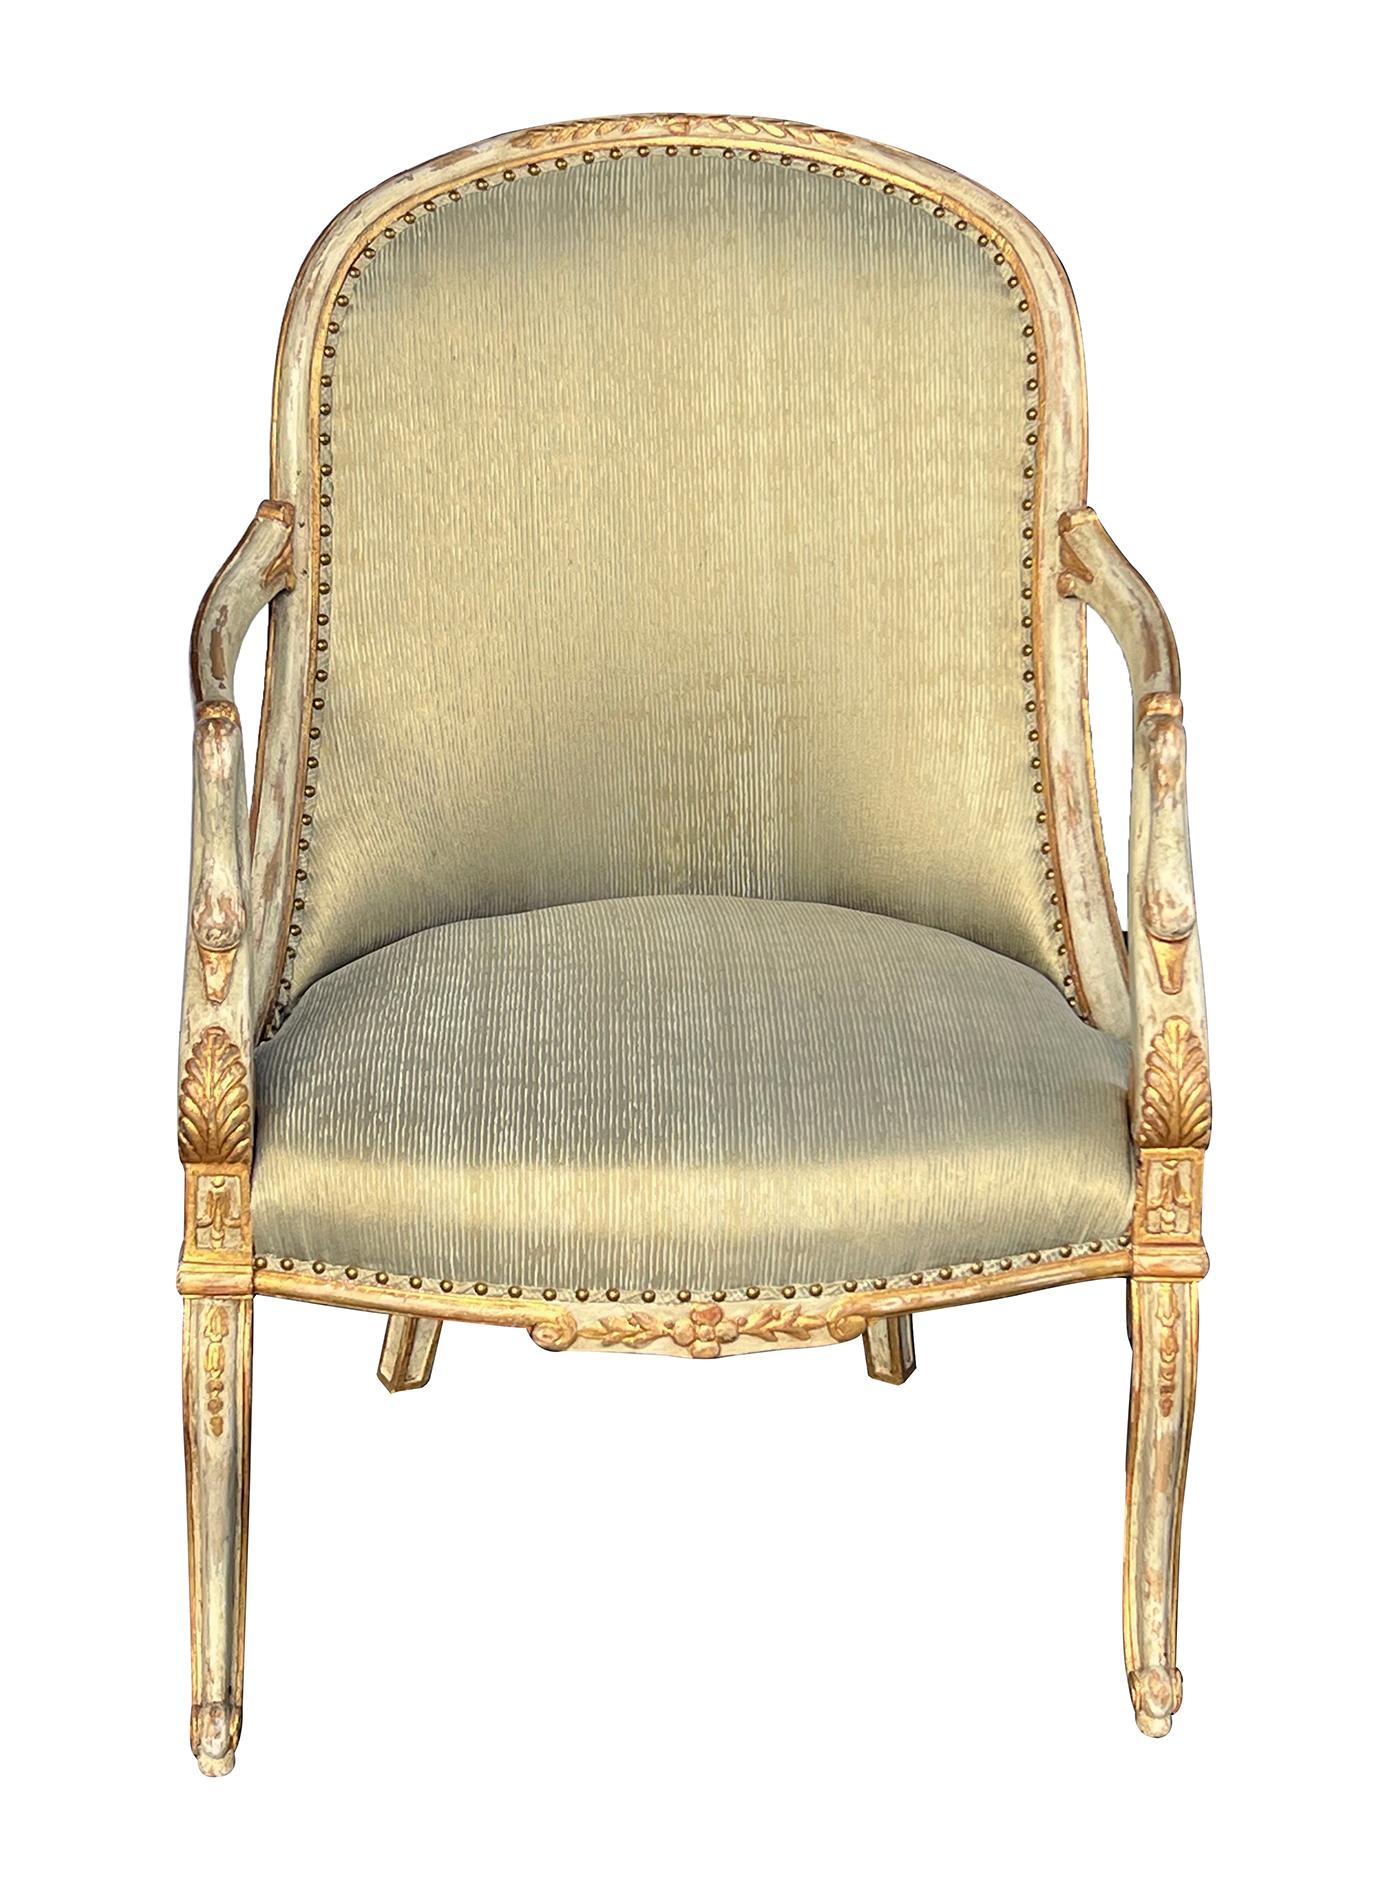 each with incurved back sloping to join a tight seat flanked by bowed arms ending in swan neck terminals; raised on cabriole legs; adorned overall with giltwood acanthus leaves, bellflowers and scrollwork